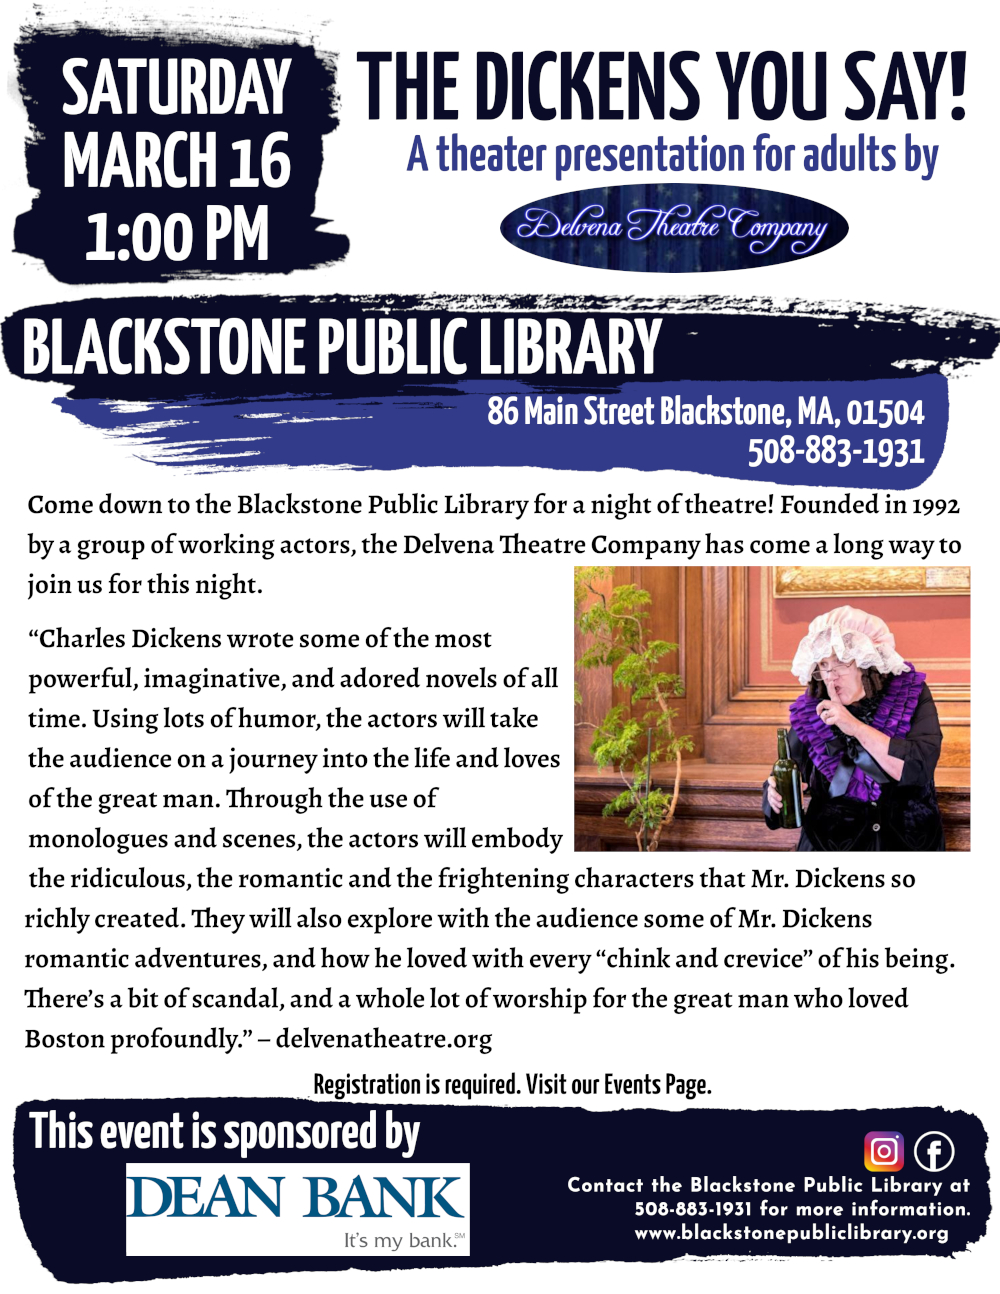 The Dickens You Say! A theater presentation for adults by Delvena Theatre Company Saturday, March 16, 1:00 PM.  Come down to the Blackstone Public Library for a night of theatre! Founded in 1992 by a group of working actors, the Delvena Theatre Company has come a long way to join us for this night.  “Charles Dickens wrote some of the most powerful, imaginative, and adored novels of all time. Using lots of humor, the actors will take the audience on a journey into the life and loves of the great man. Through the use of monologues and scenes, the actors will embody the ridiculous, the romantic and the frightening characters that Mr. Dickens so richly created. They will also explore with the audience some of Mr. Dickens romantic adventures, and how he loved with every “chink and crevice” of his being. There’s a bit of scandal, and a whole lot of worship for the great man who loved Boston profoundly.” – delvenatheatre.org  Flyer includes a photograph of a Delvena Theater actress dressed in costume, wearing a frilly black and purple top and a soft white lace bonnet, holding a green glass bottle in one hand, and using the other hand to ‘shush’ someone off camera.   Registration is required. Visit our Events Page. Blackstone Public Library at 508-883-1931 to register, or for more information.  This event is sponsored by Dean Bank.